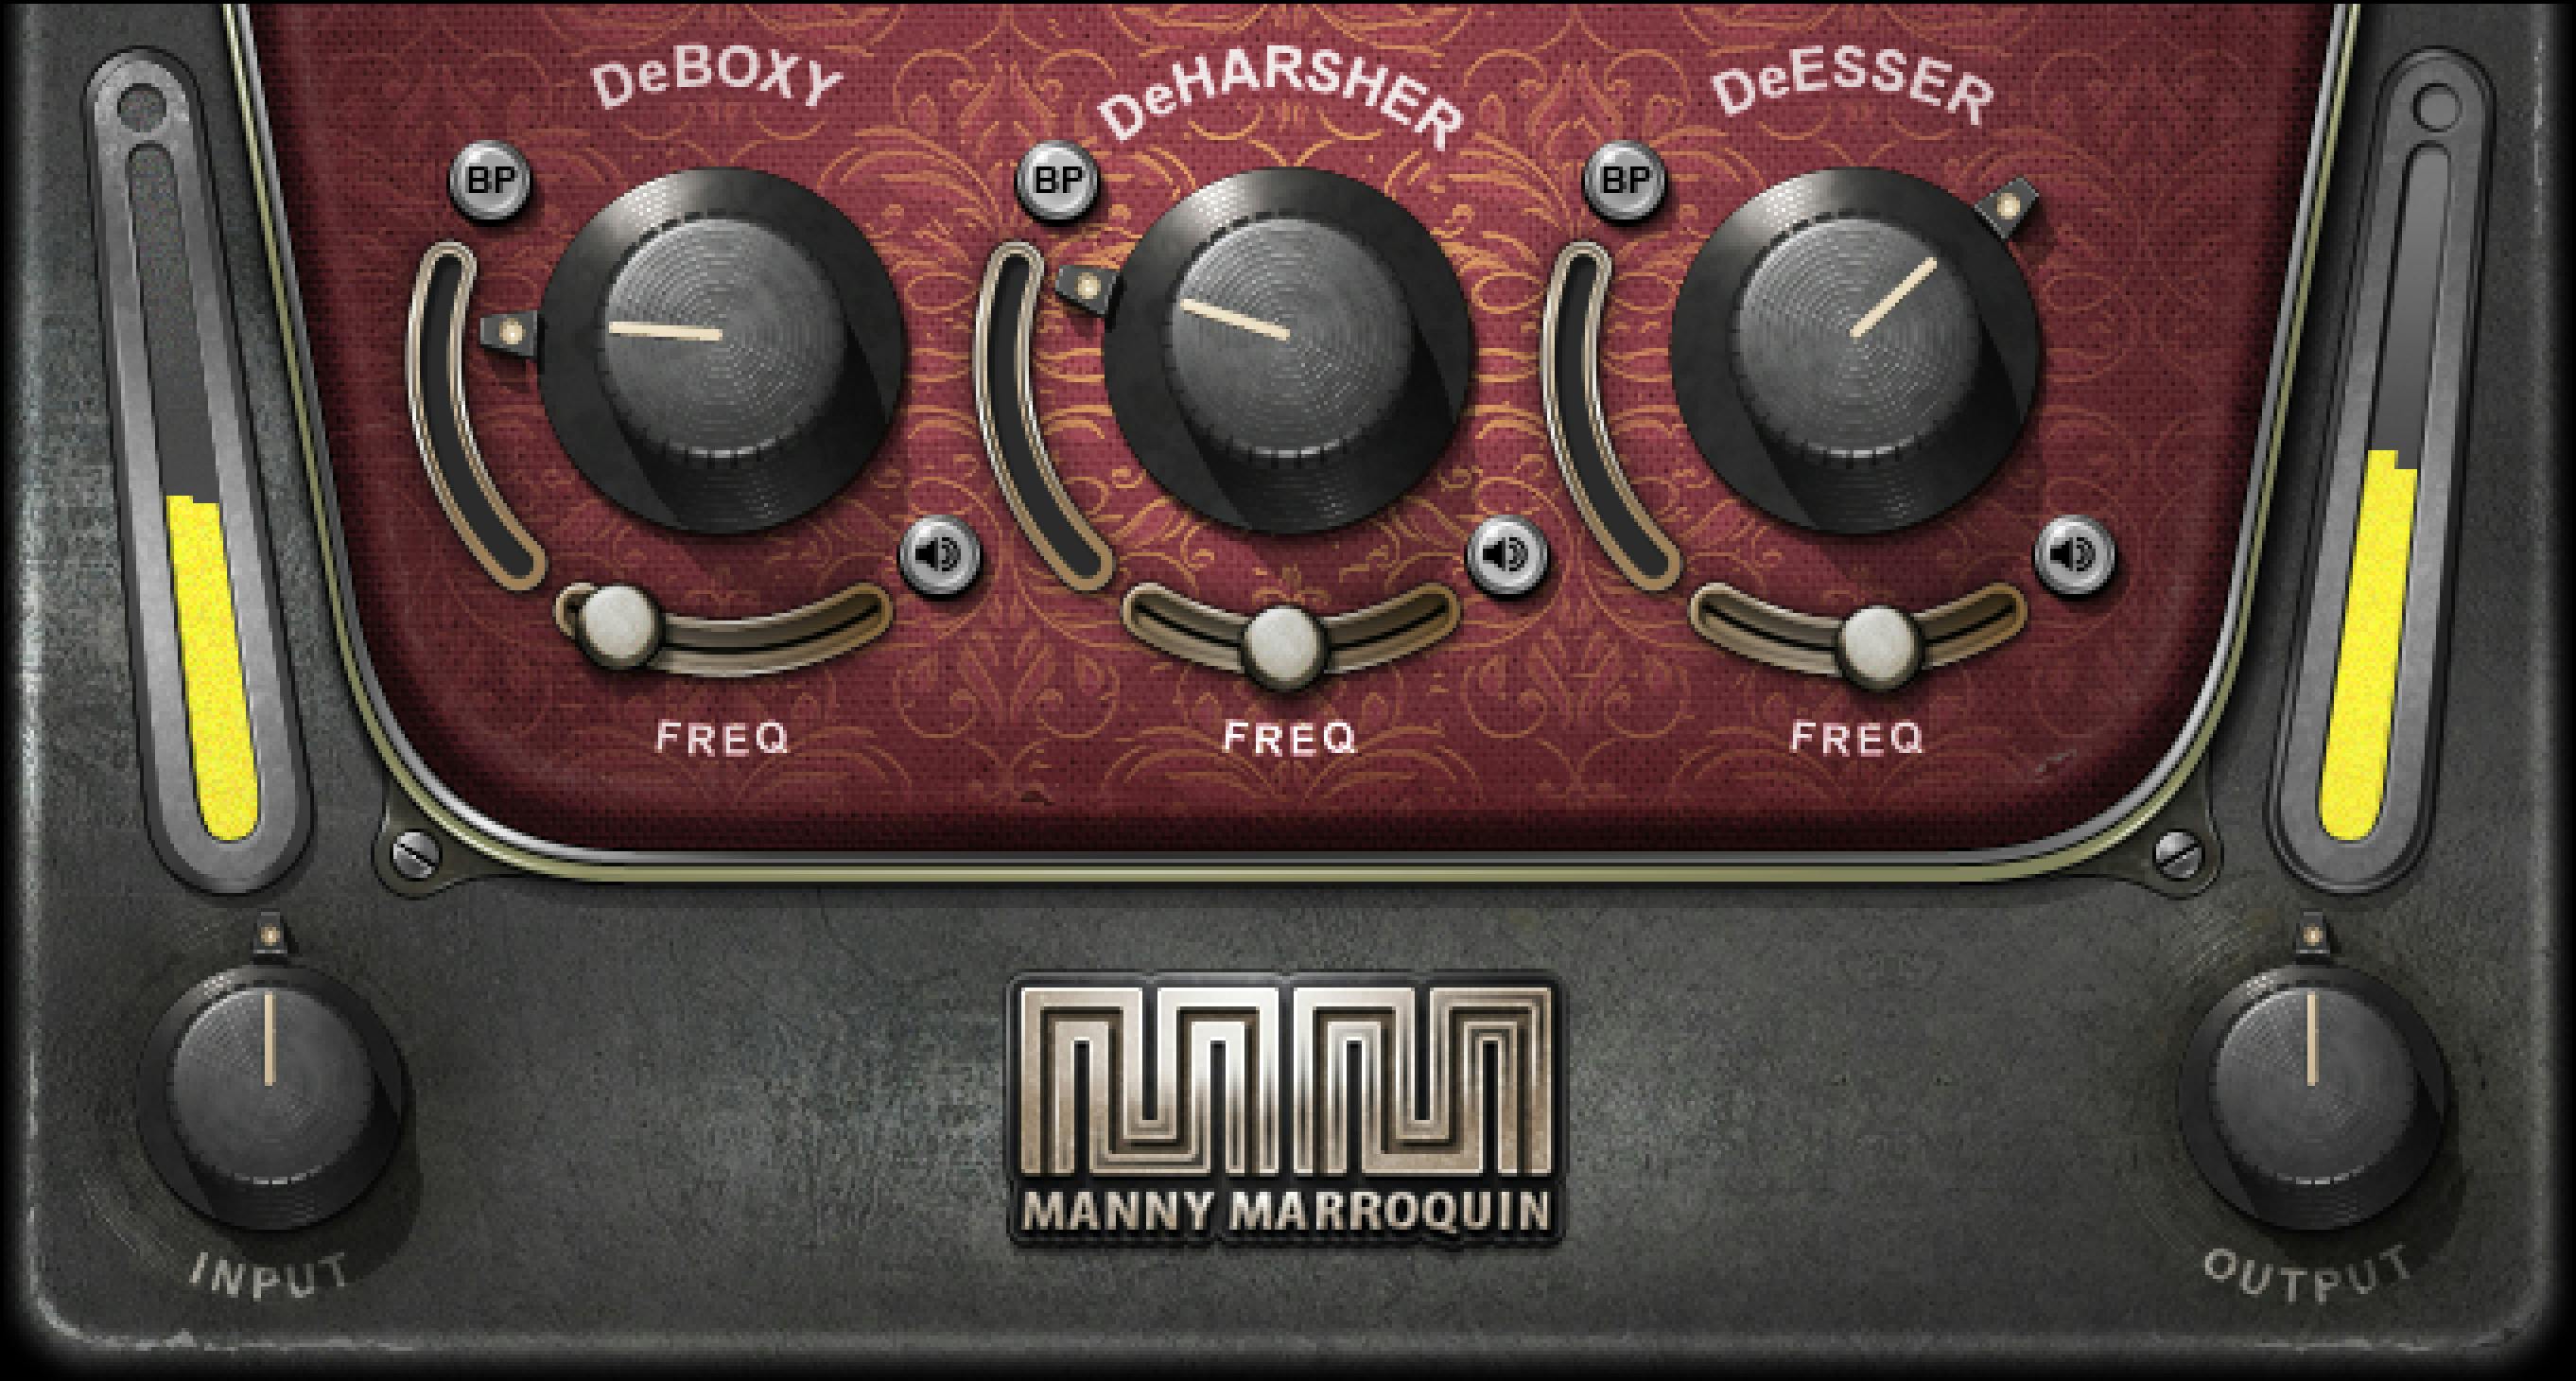 FREE Waves Manny Marroquin Tone Shaper - Get It For A Limited